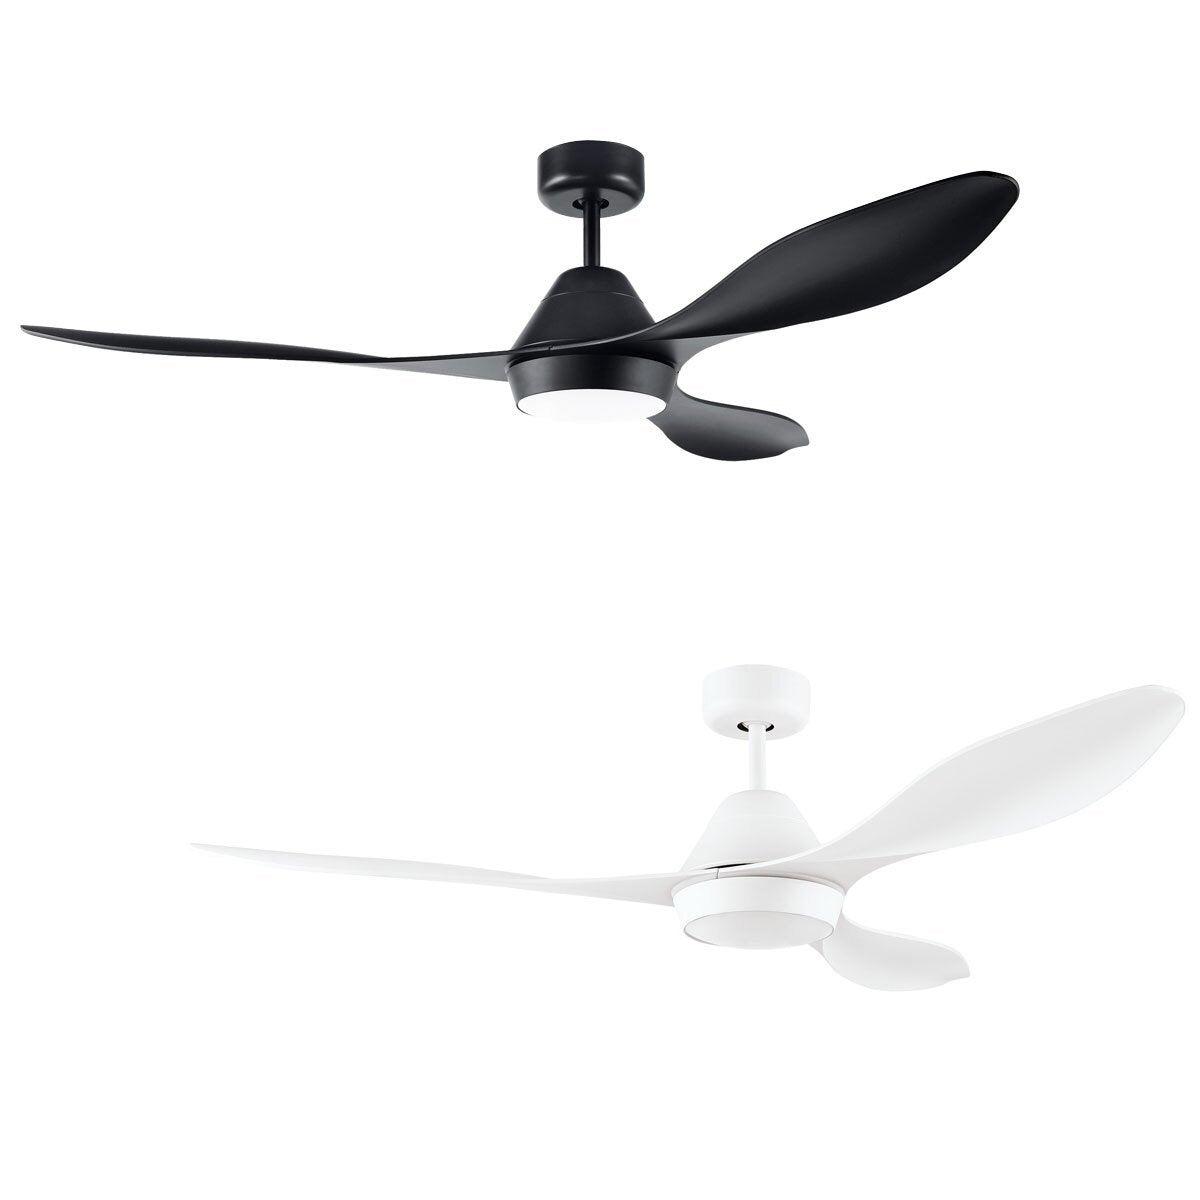 Eglo Antibes 3 Blade (132cm) Indoor Ceiling Fan with DC Motor, LED Light and Remote Control, available in 2 Colours - Signature Retail Stores